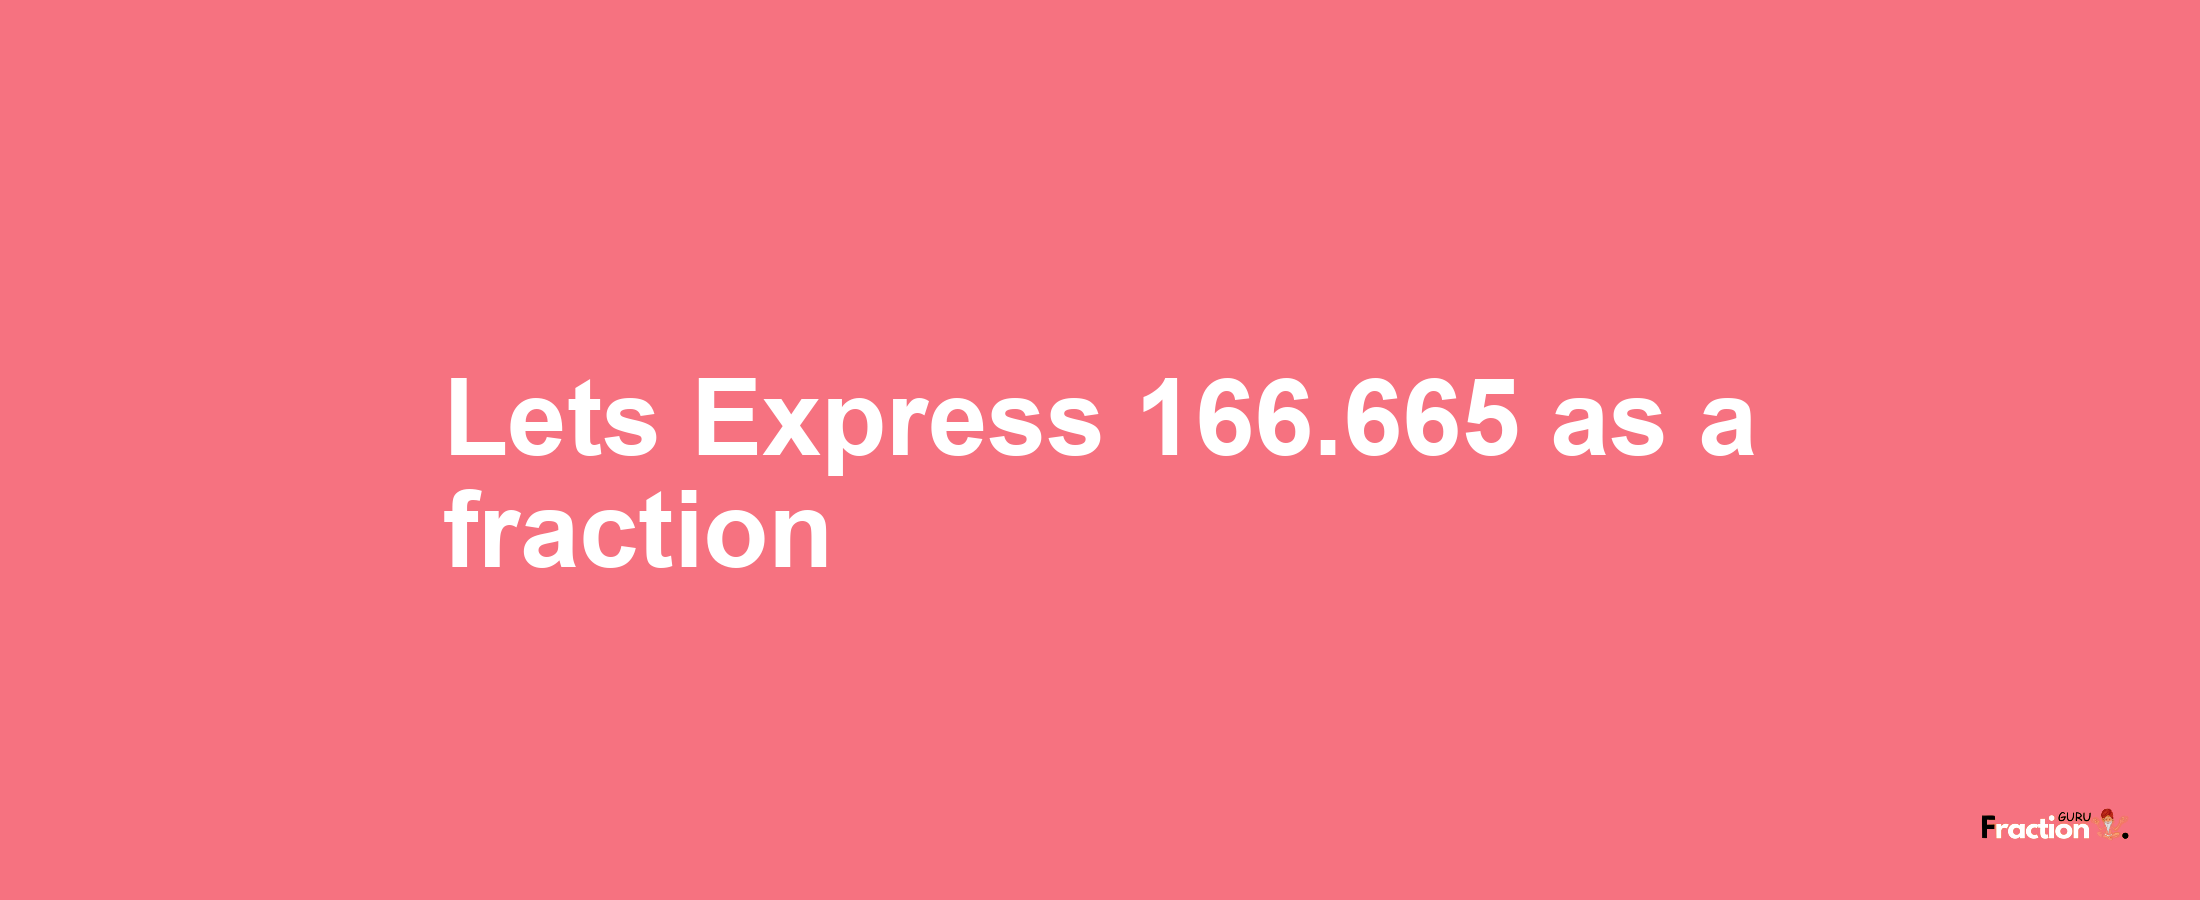 Lets Express 166.665 as afraction